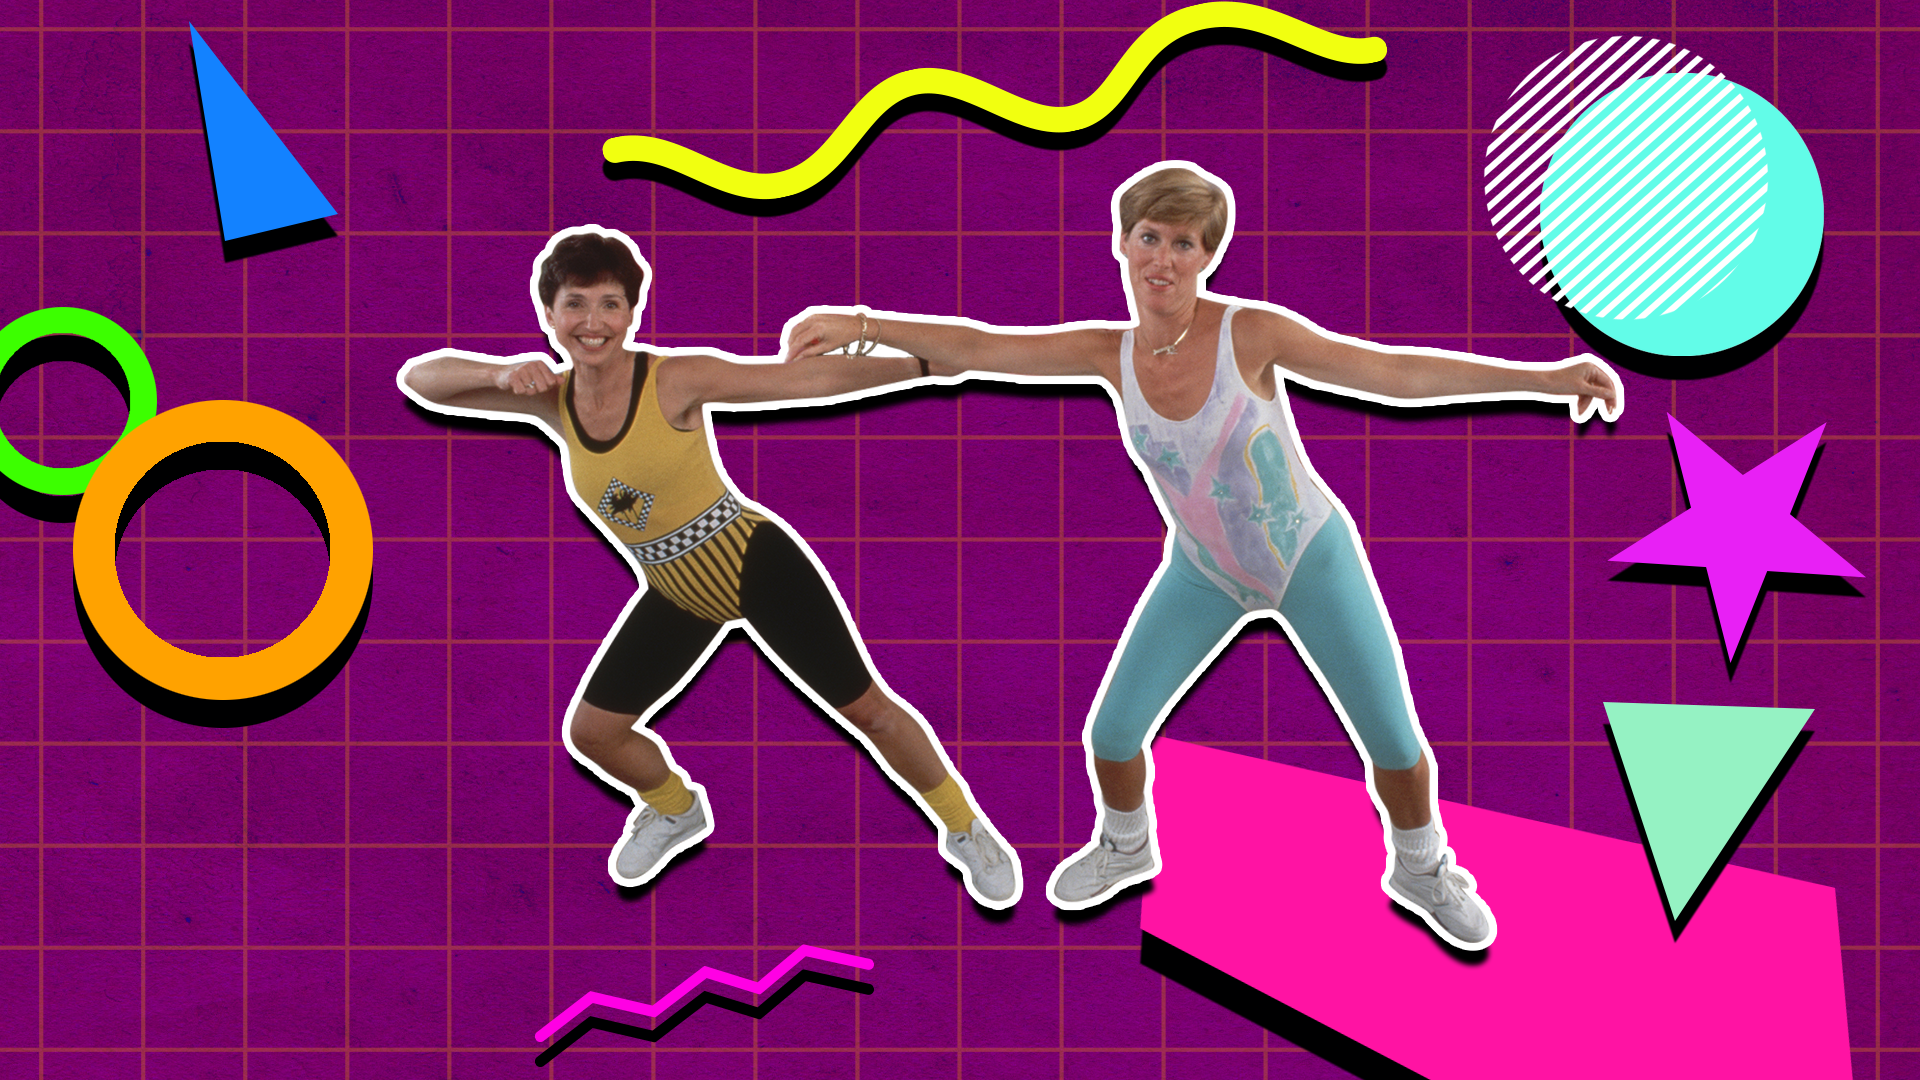 Jazzercise is 50, and it has evolved beyond lunges, legwarmers and